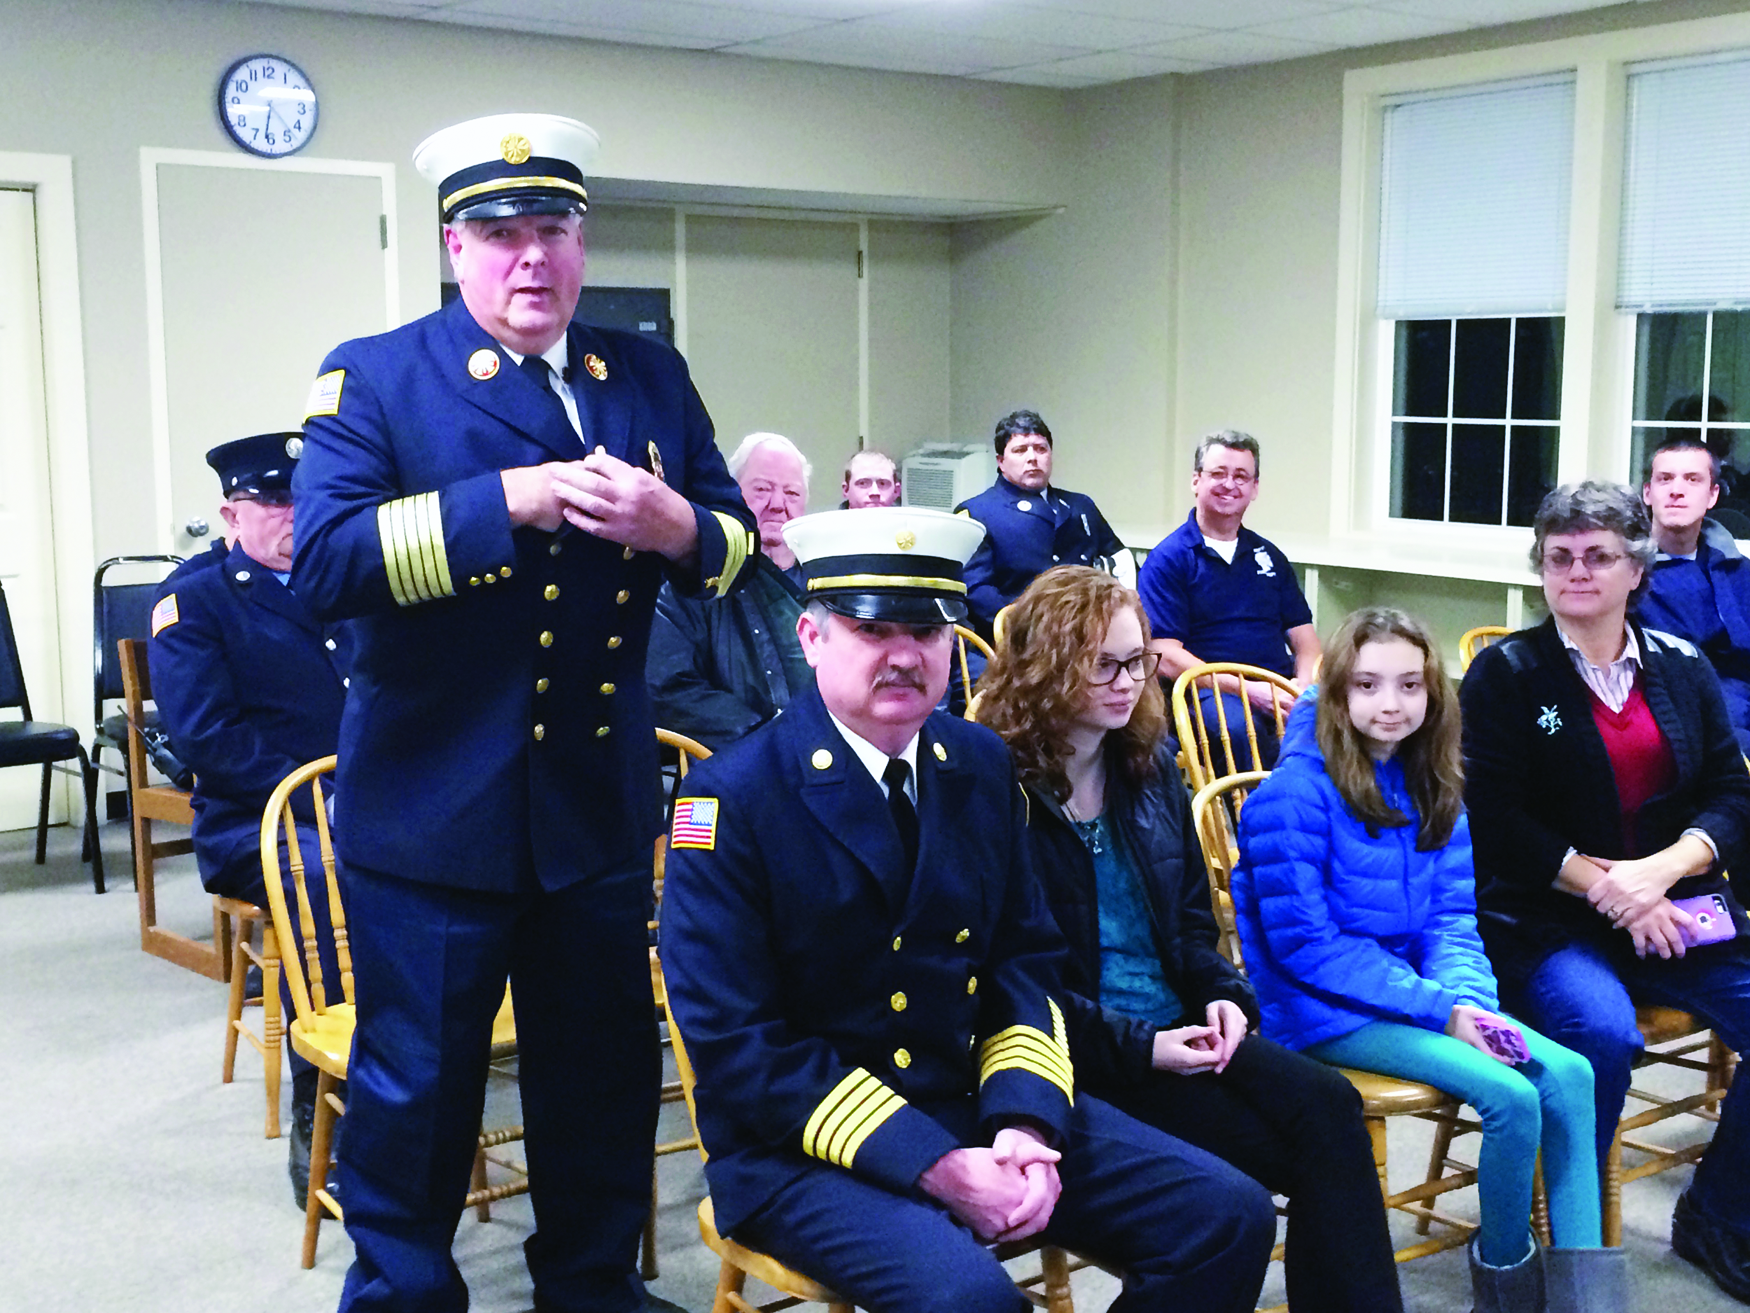 Plympton Fire Chief Warren Borsari stands and addresses the Board of Selectmen while a full crowd sits behind him and Steven Winslow, about to be appointed Deputy Fire Chief sits in the front row with his daughters and wife.